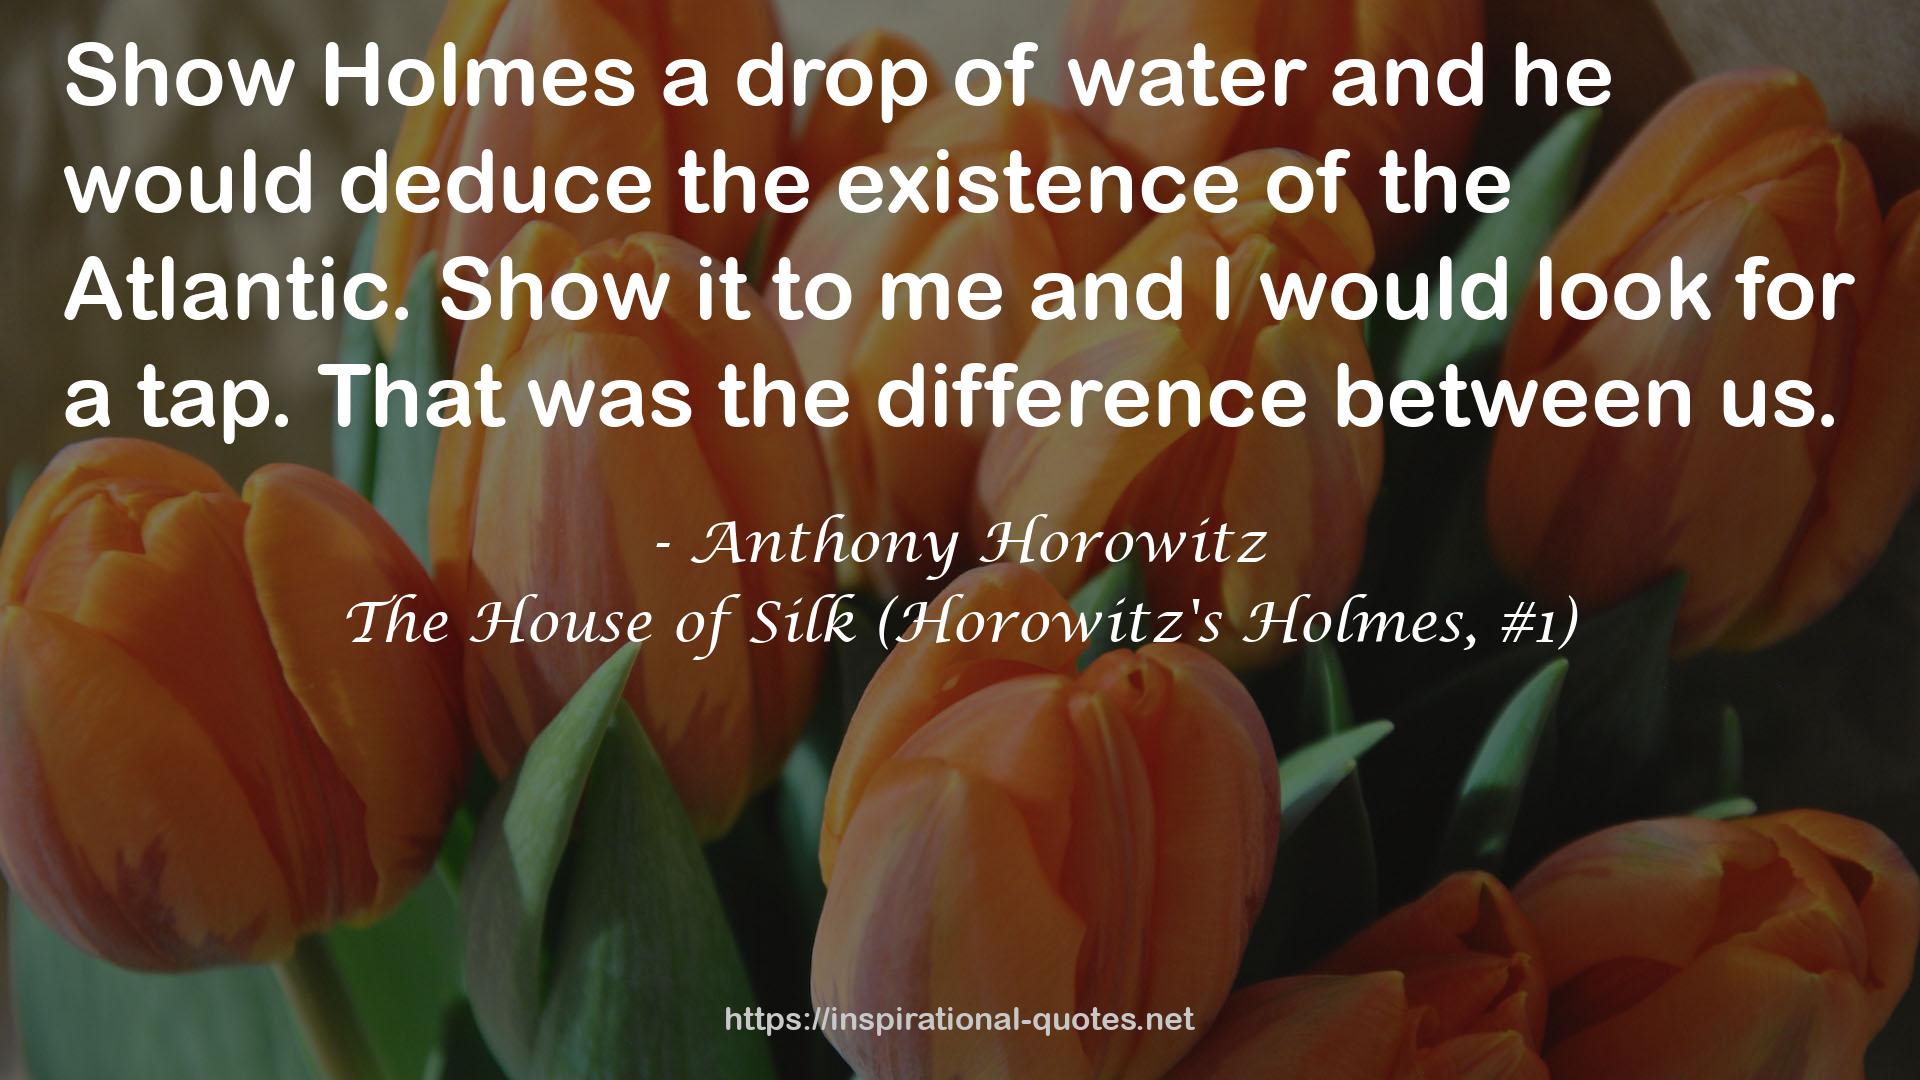 The House of Silk (Horowitz's Holmes, #1) QUOTES